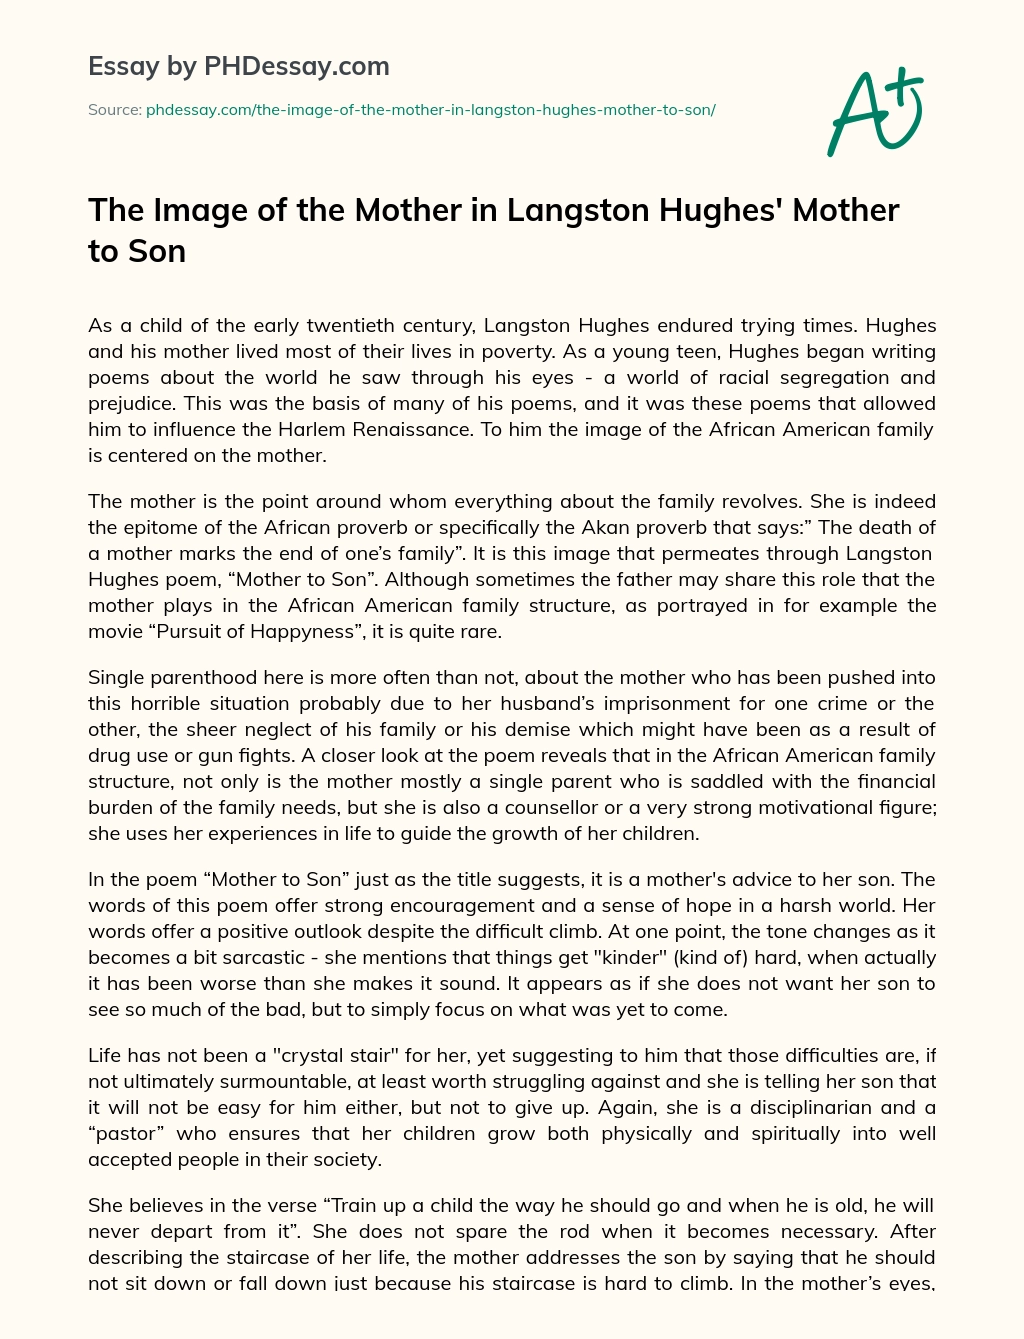 The Image of the Mother in Langston Hughes’ Mother to Son essay